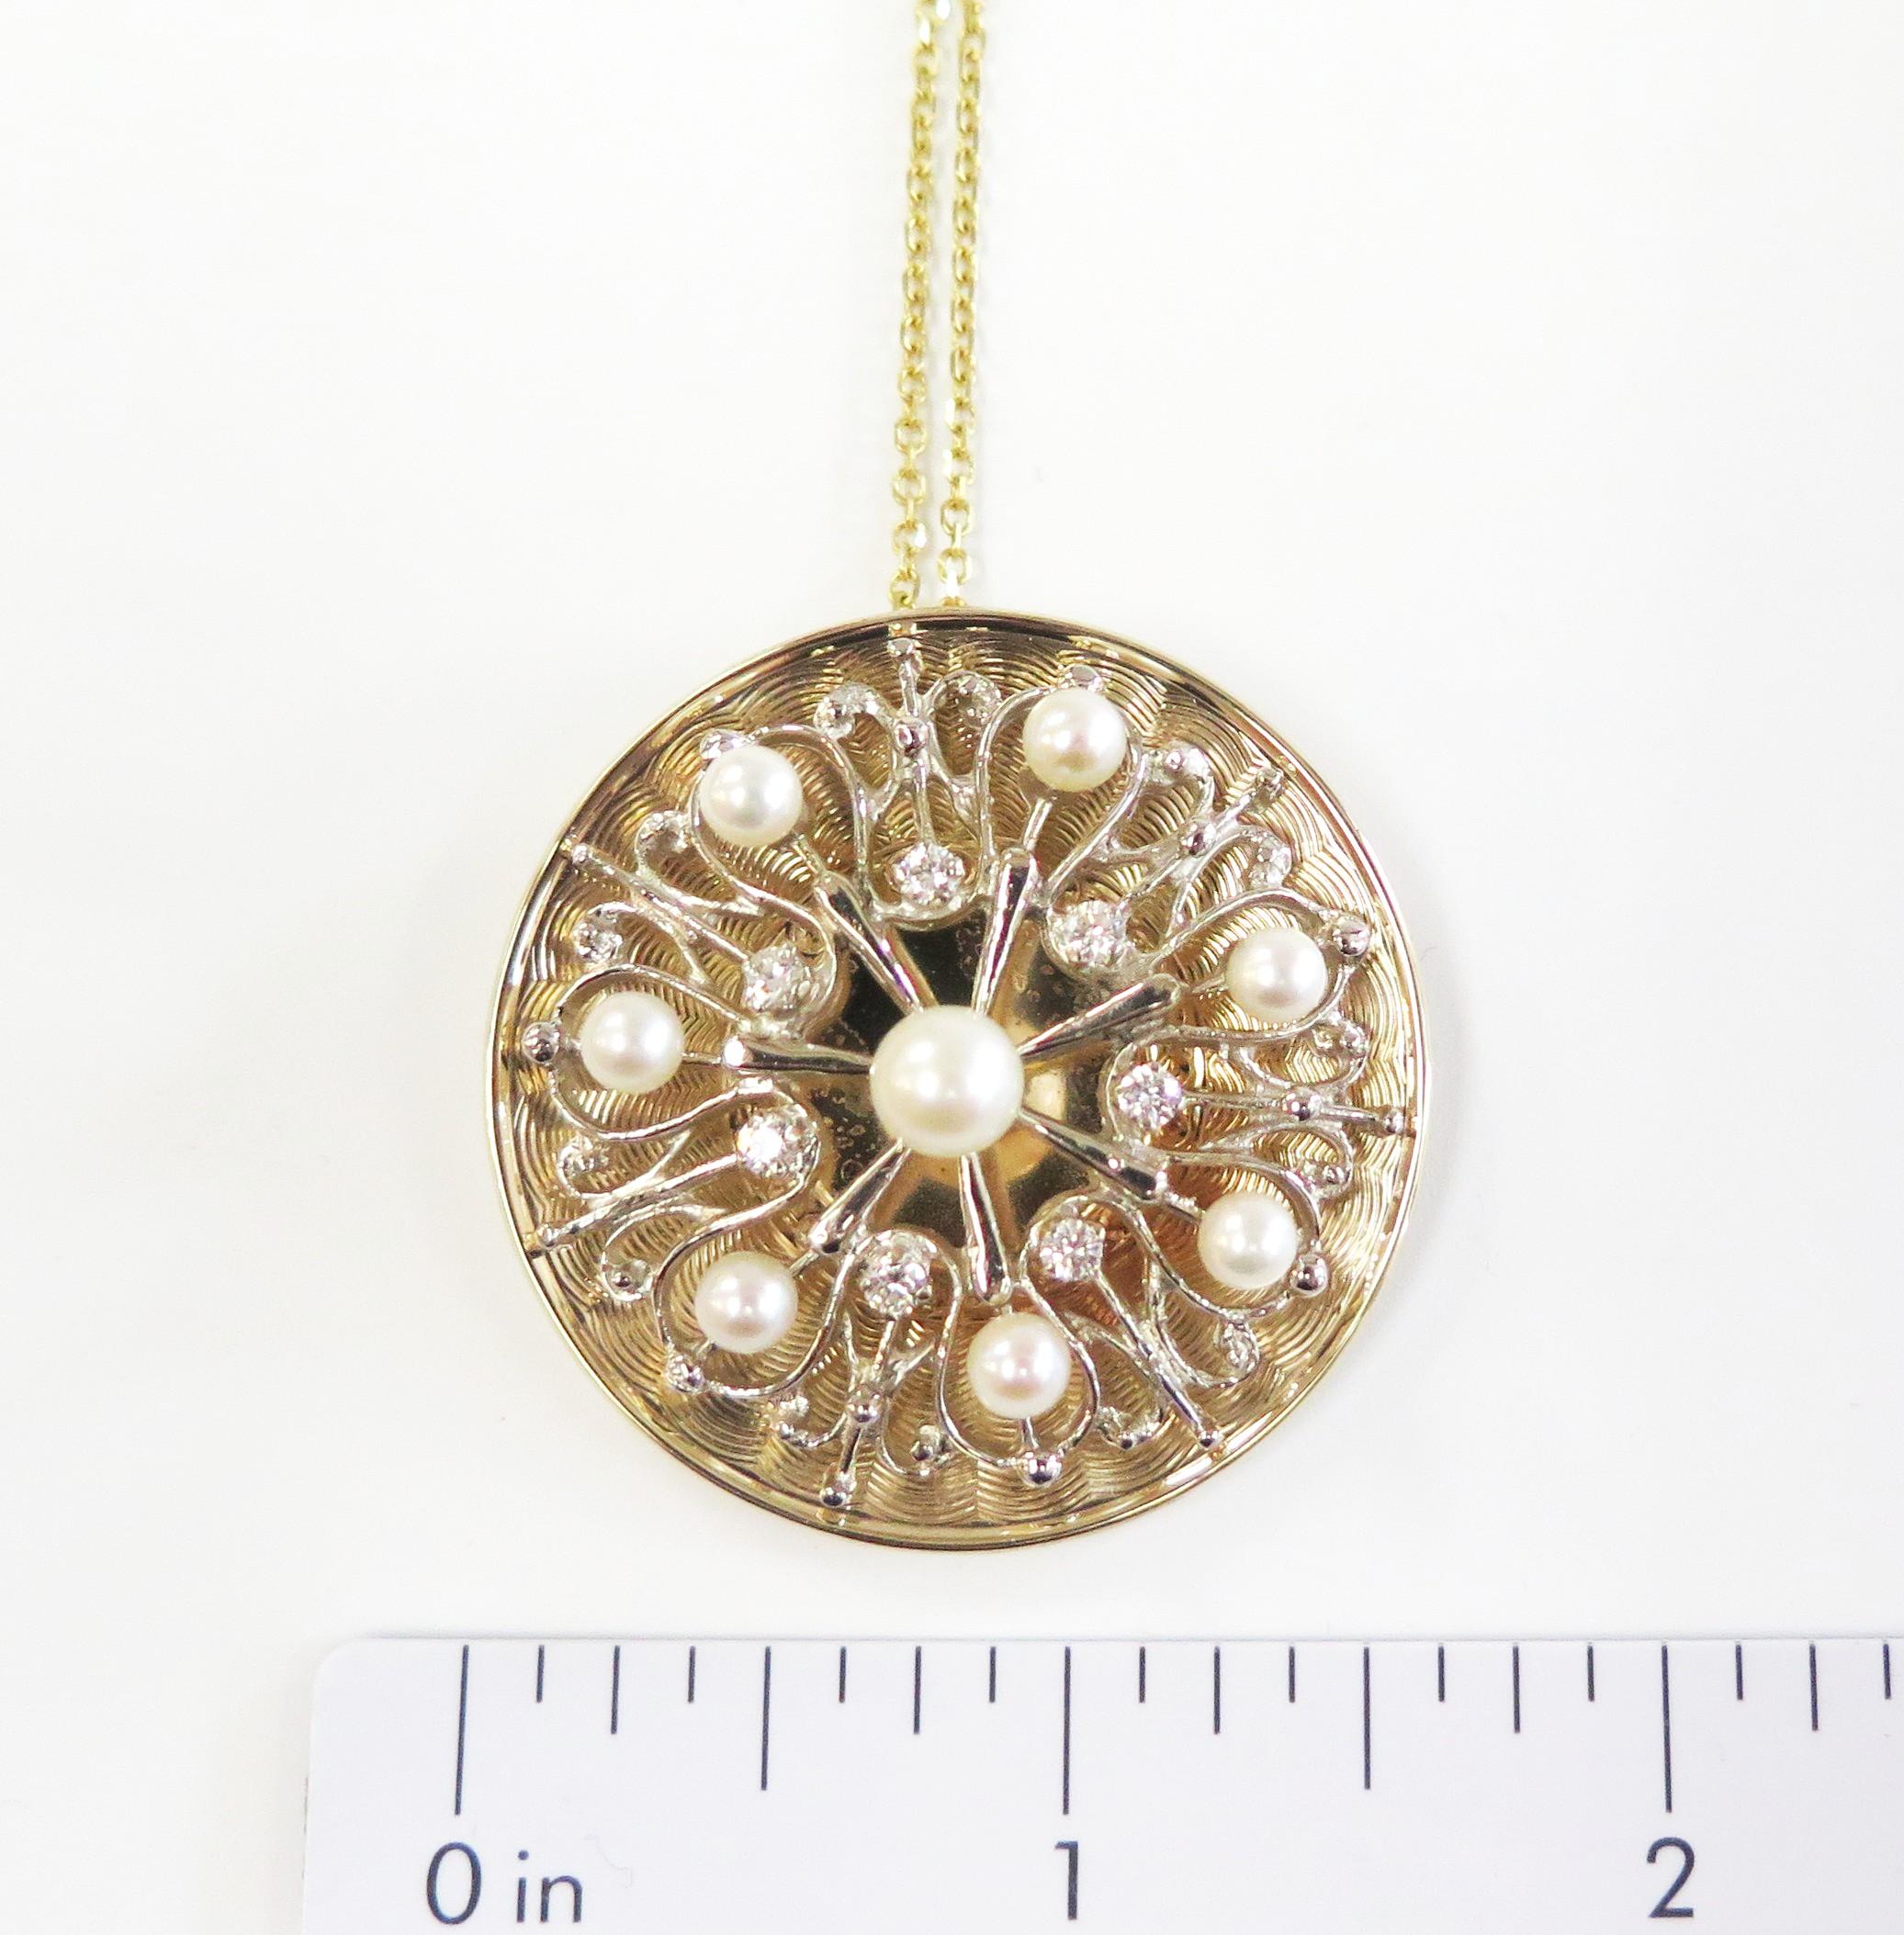 Round Cut Large Round 14 Karat Gold Pendant with Cultured Pearls and Diamonds